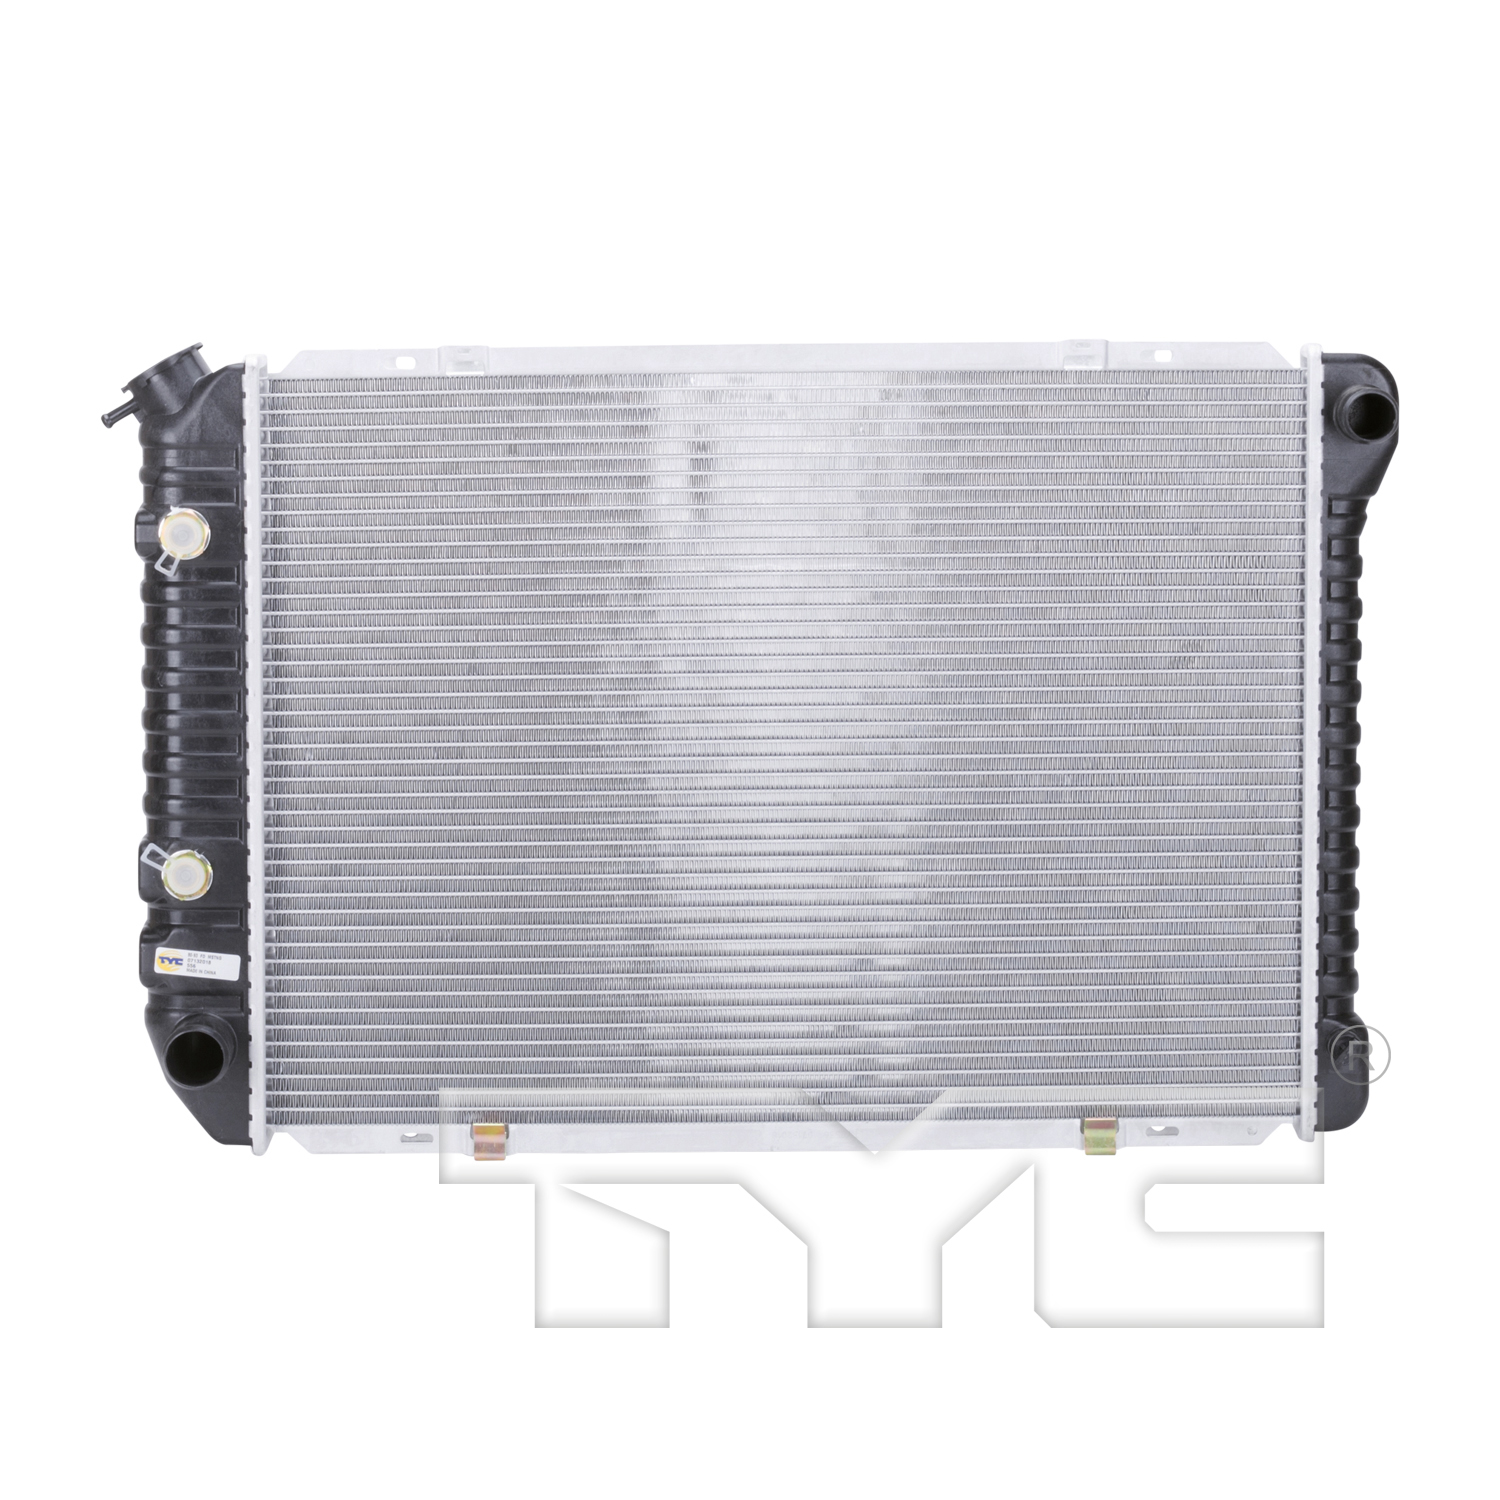 Aftermarket RADIATORS for MERCURY - COUGAR, COUGAR,87-88,Radiator assembly